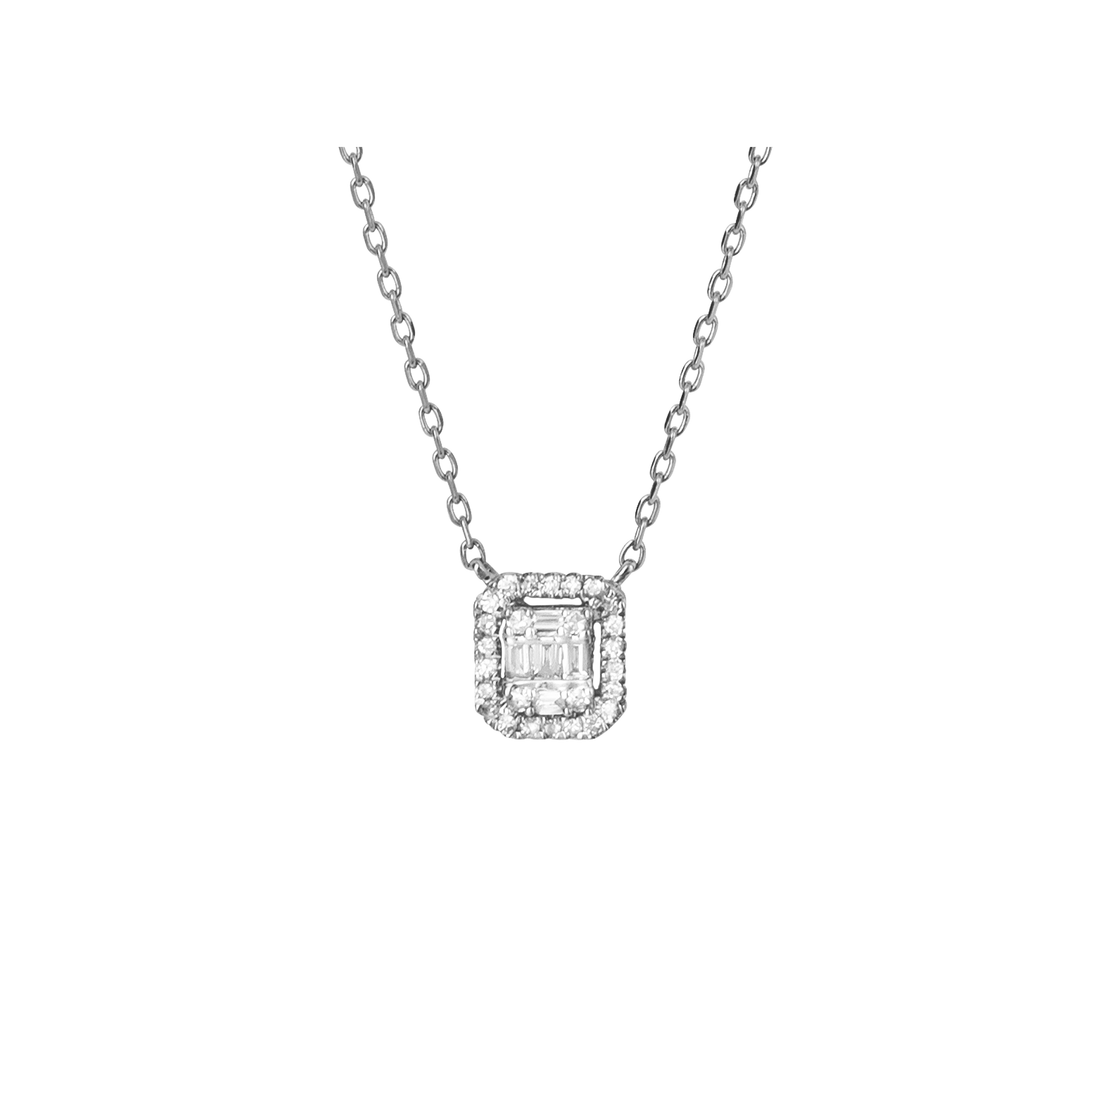 Pave Square Diamond Necklace in 9ct White Gold - Robert Anthony Jewellers, Edinburgh